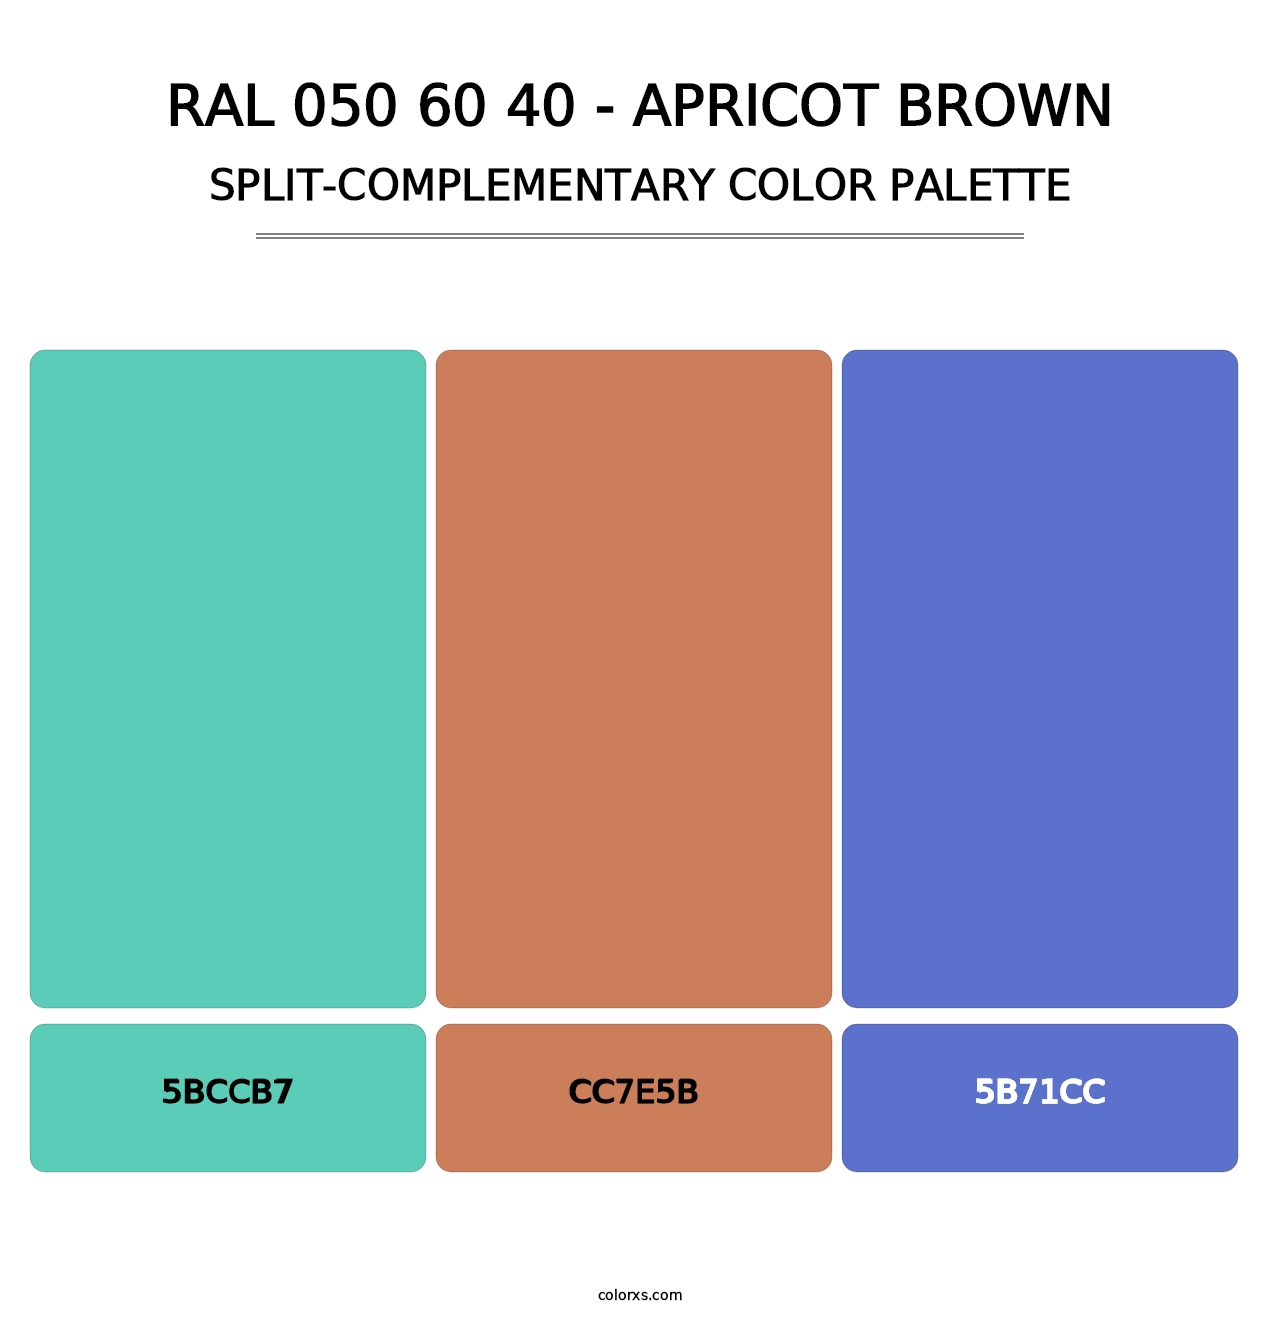 RAL 050 60 40 - Apricot Brown - Split-Complementary Color Palette